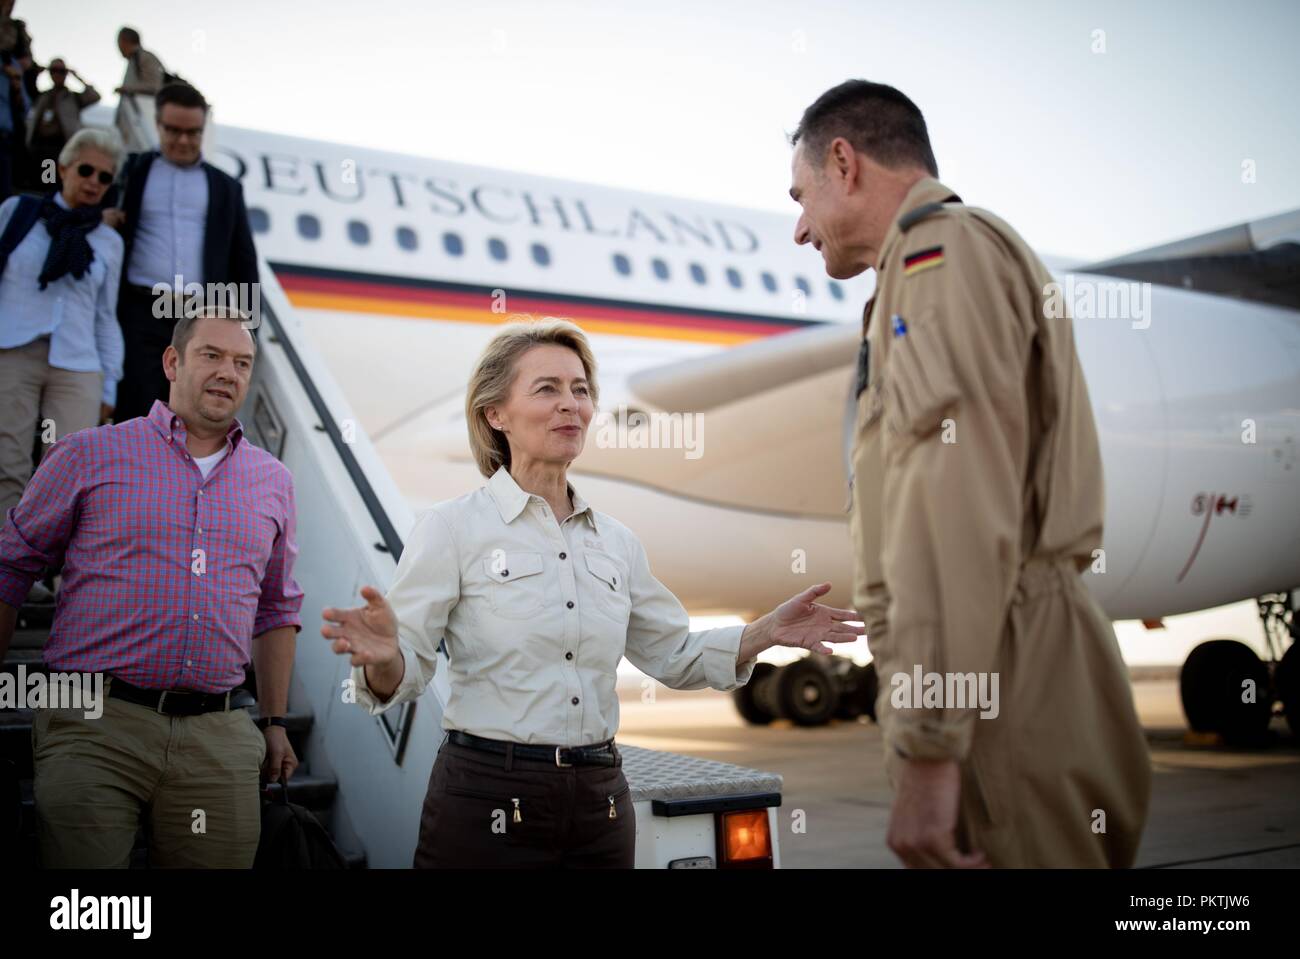 15 September 2018, Jordan, Azraq: 15 September 2018, Germany, Azraq: Ursula von der Leyen (CDU), Federal Minister of Defence, arrives at the air base in Al Azraq in Jordan and is welcomed by Kristof Conrath (R), contingent leader of the German contingent. In the background Henning Otte (3-L, CDU member of the Bundestag), Marie-Agnes Strack-Zimmermann (FDP member of the Bundestag) and Tobias Lindner (member of the Bundestag of Alliance 90/The Greens) come down the gangway. The minister and defence politicians of the parliamentary groups visit the German contingent that is involved in t Stock Photo